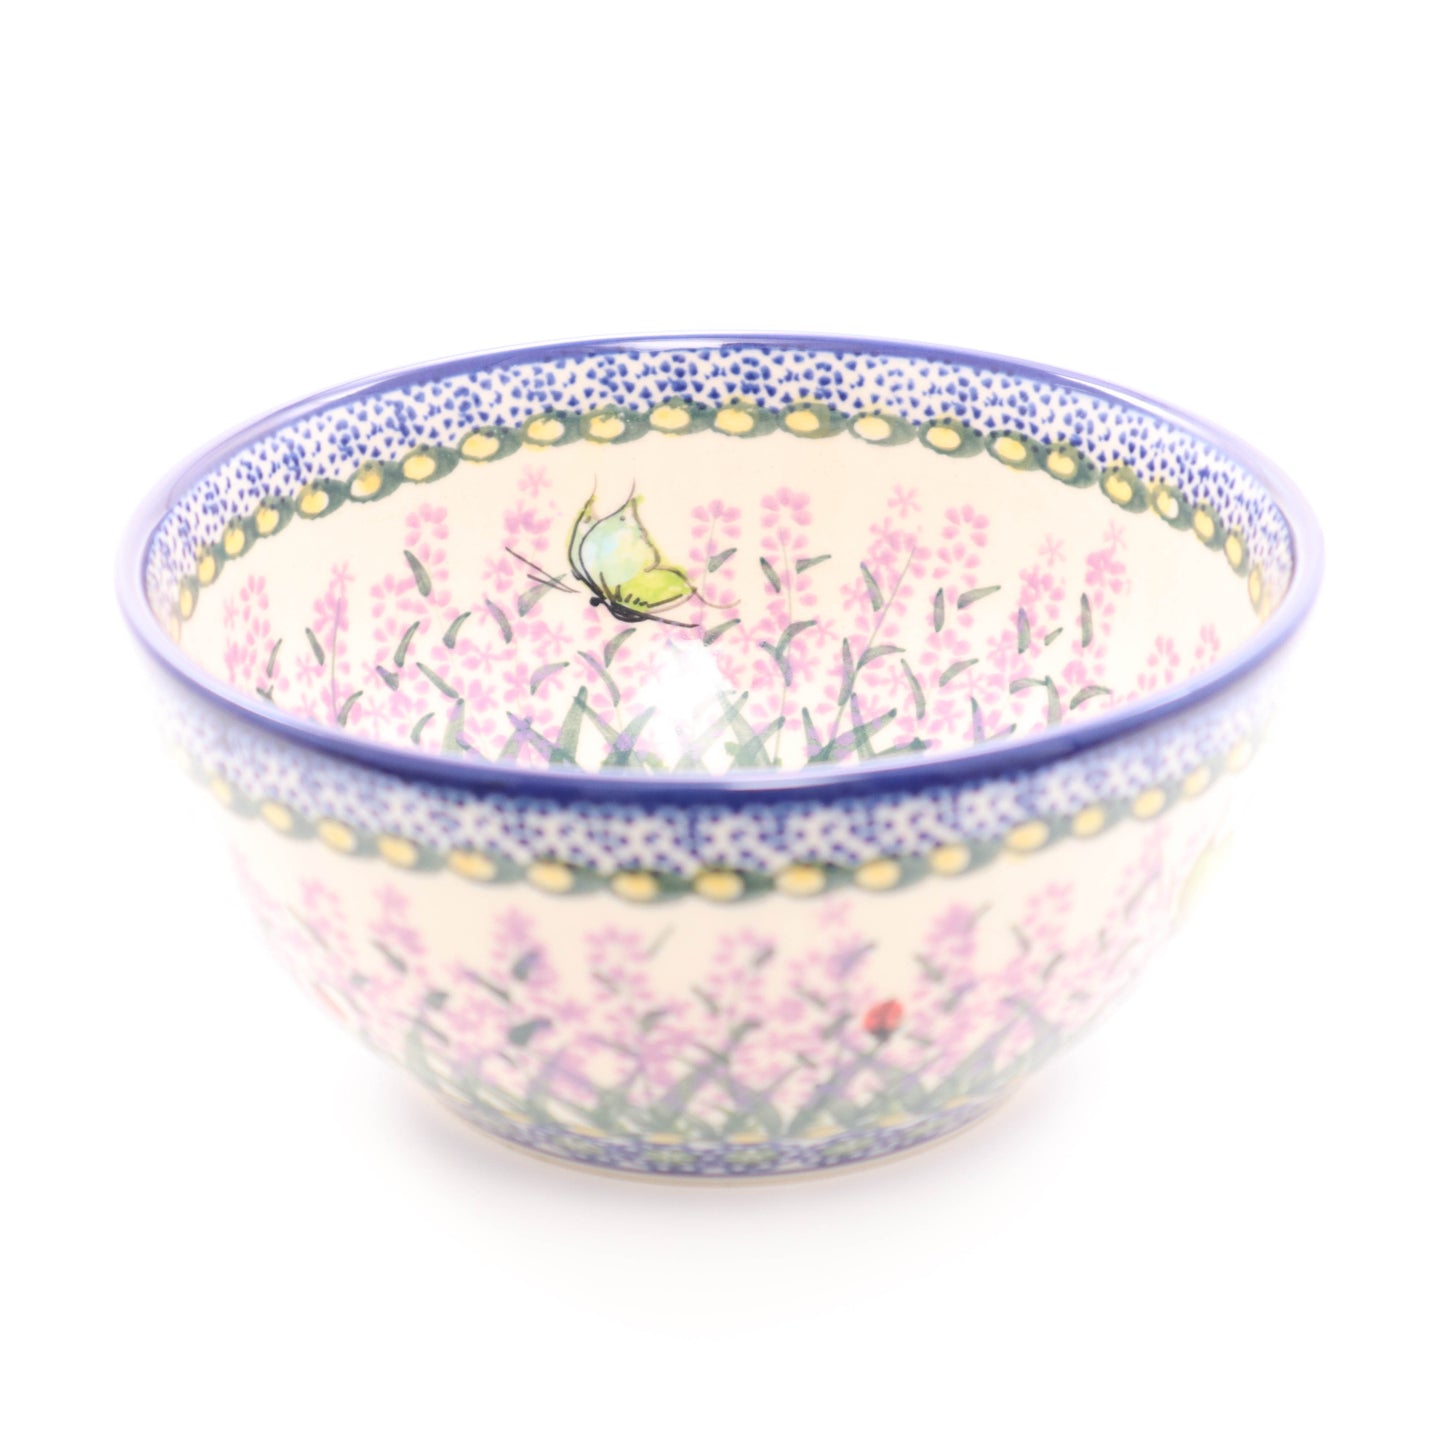 6" Cereal Bowl. Pattern: Lavender Fields